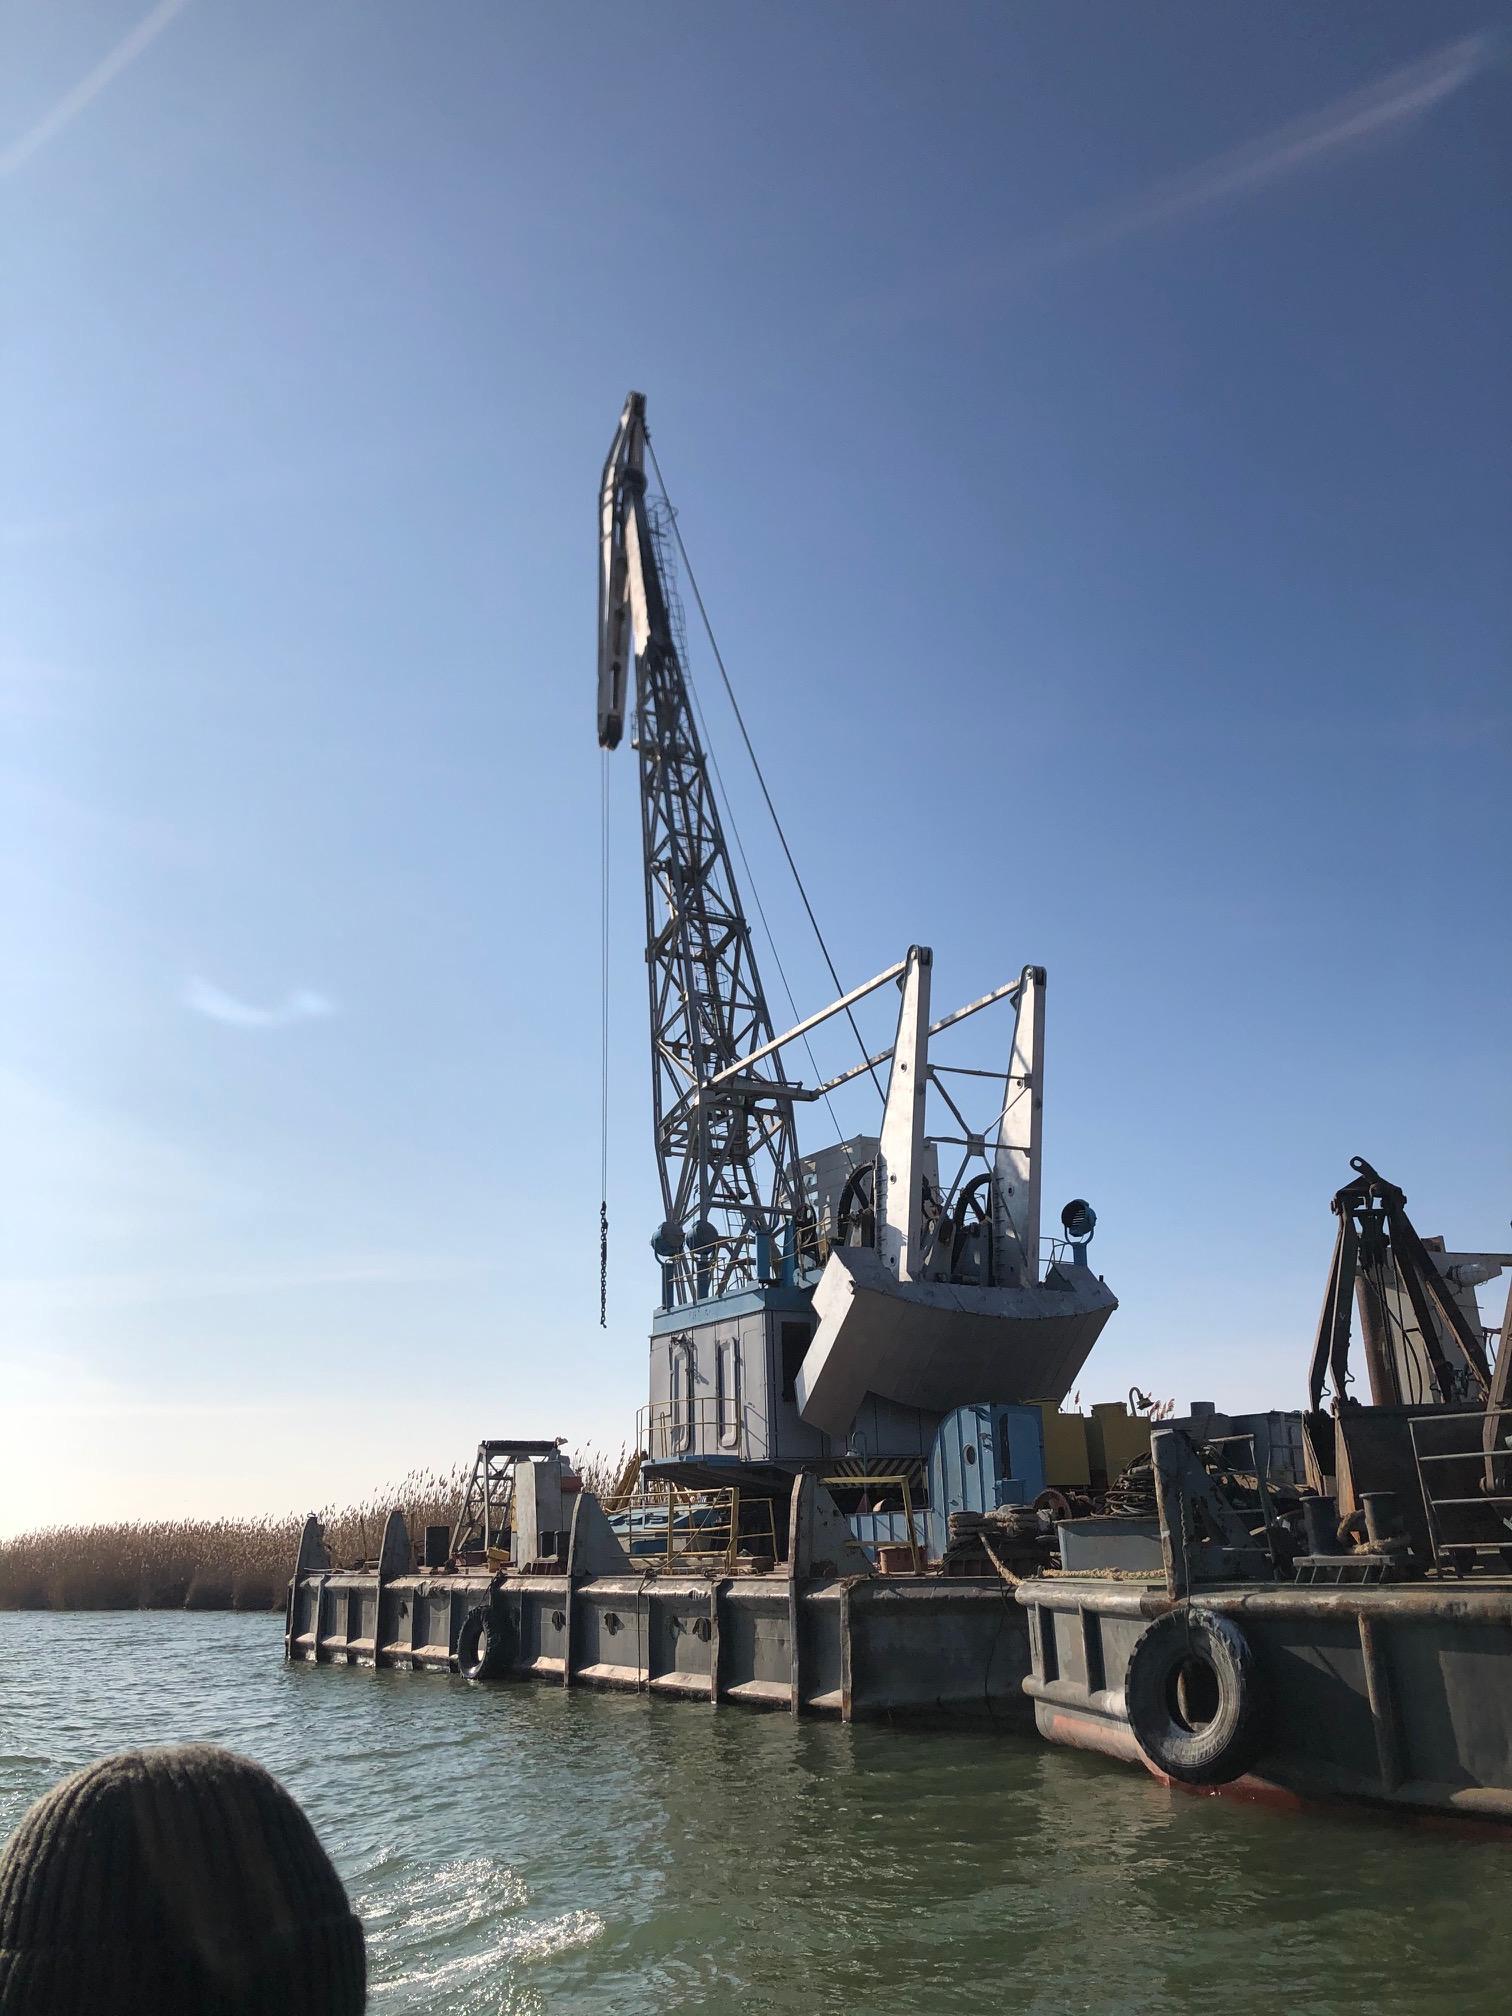 how does dreding work how does dredging work?